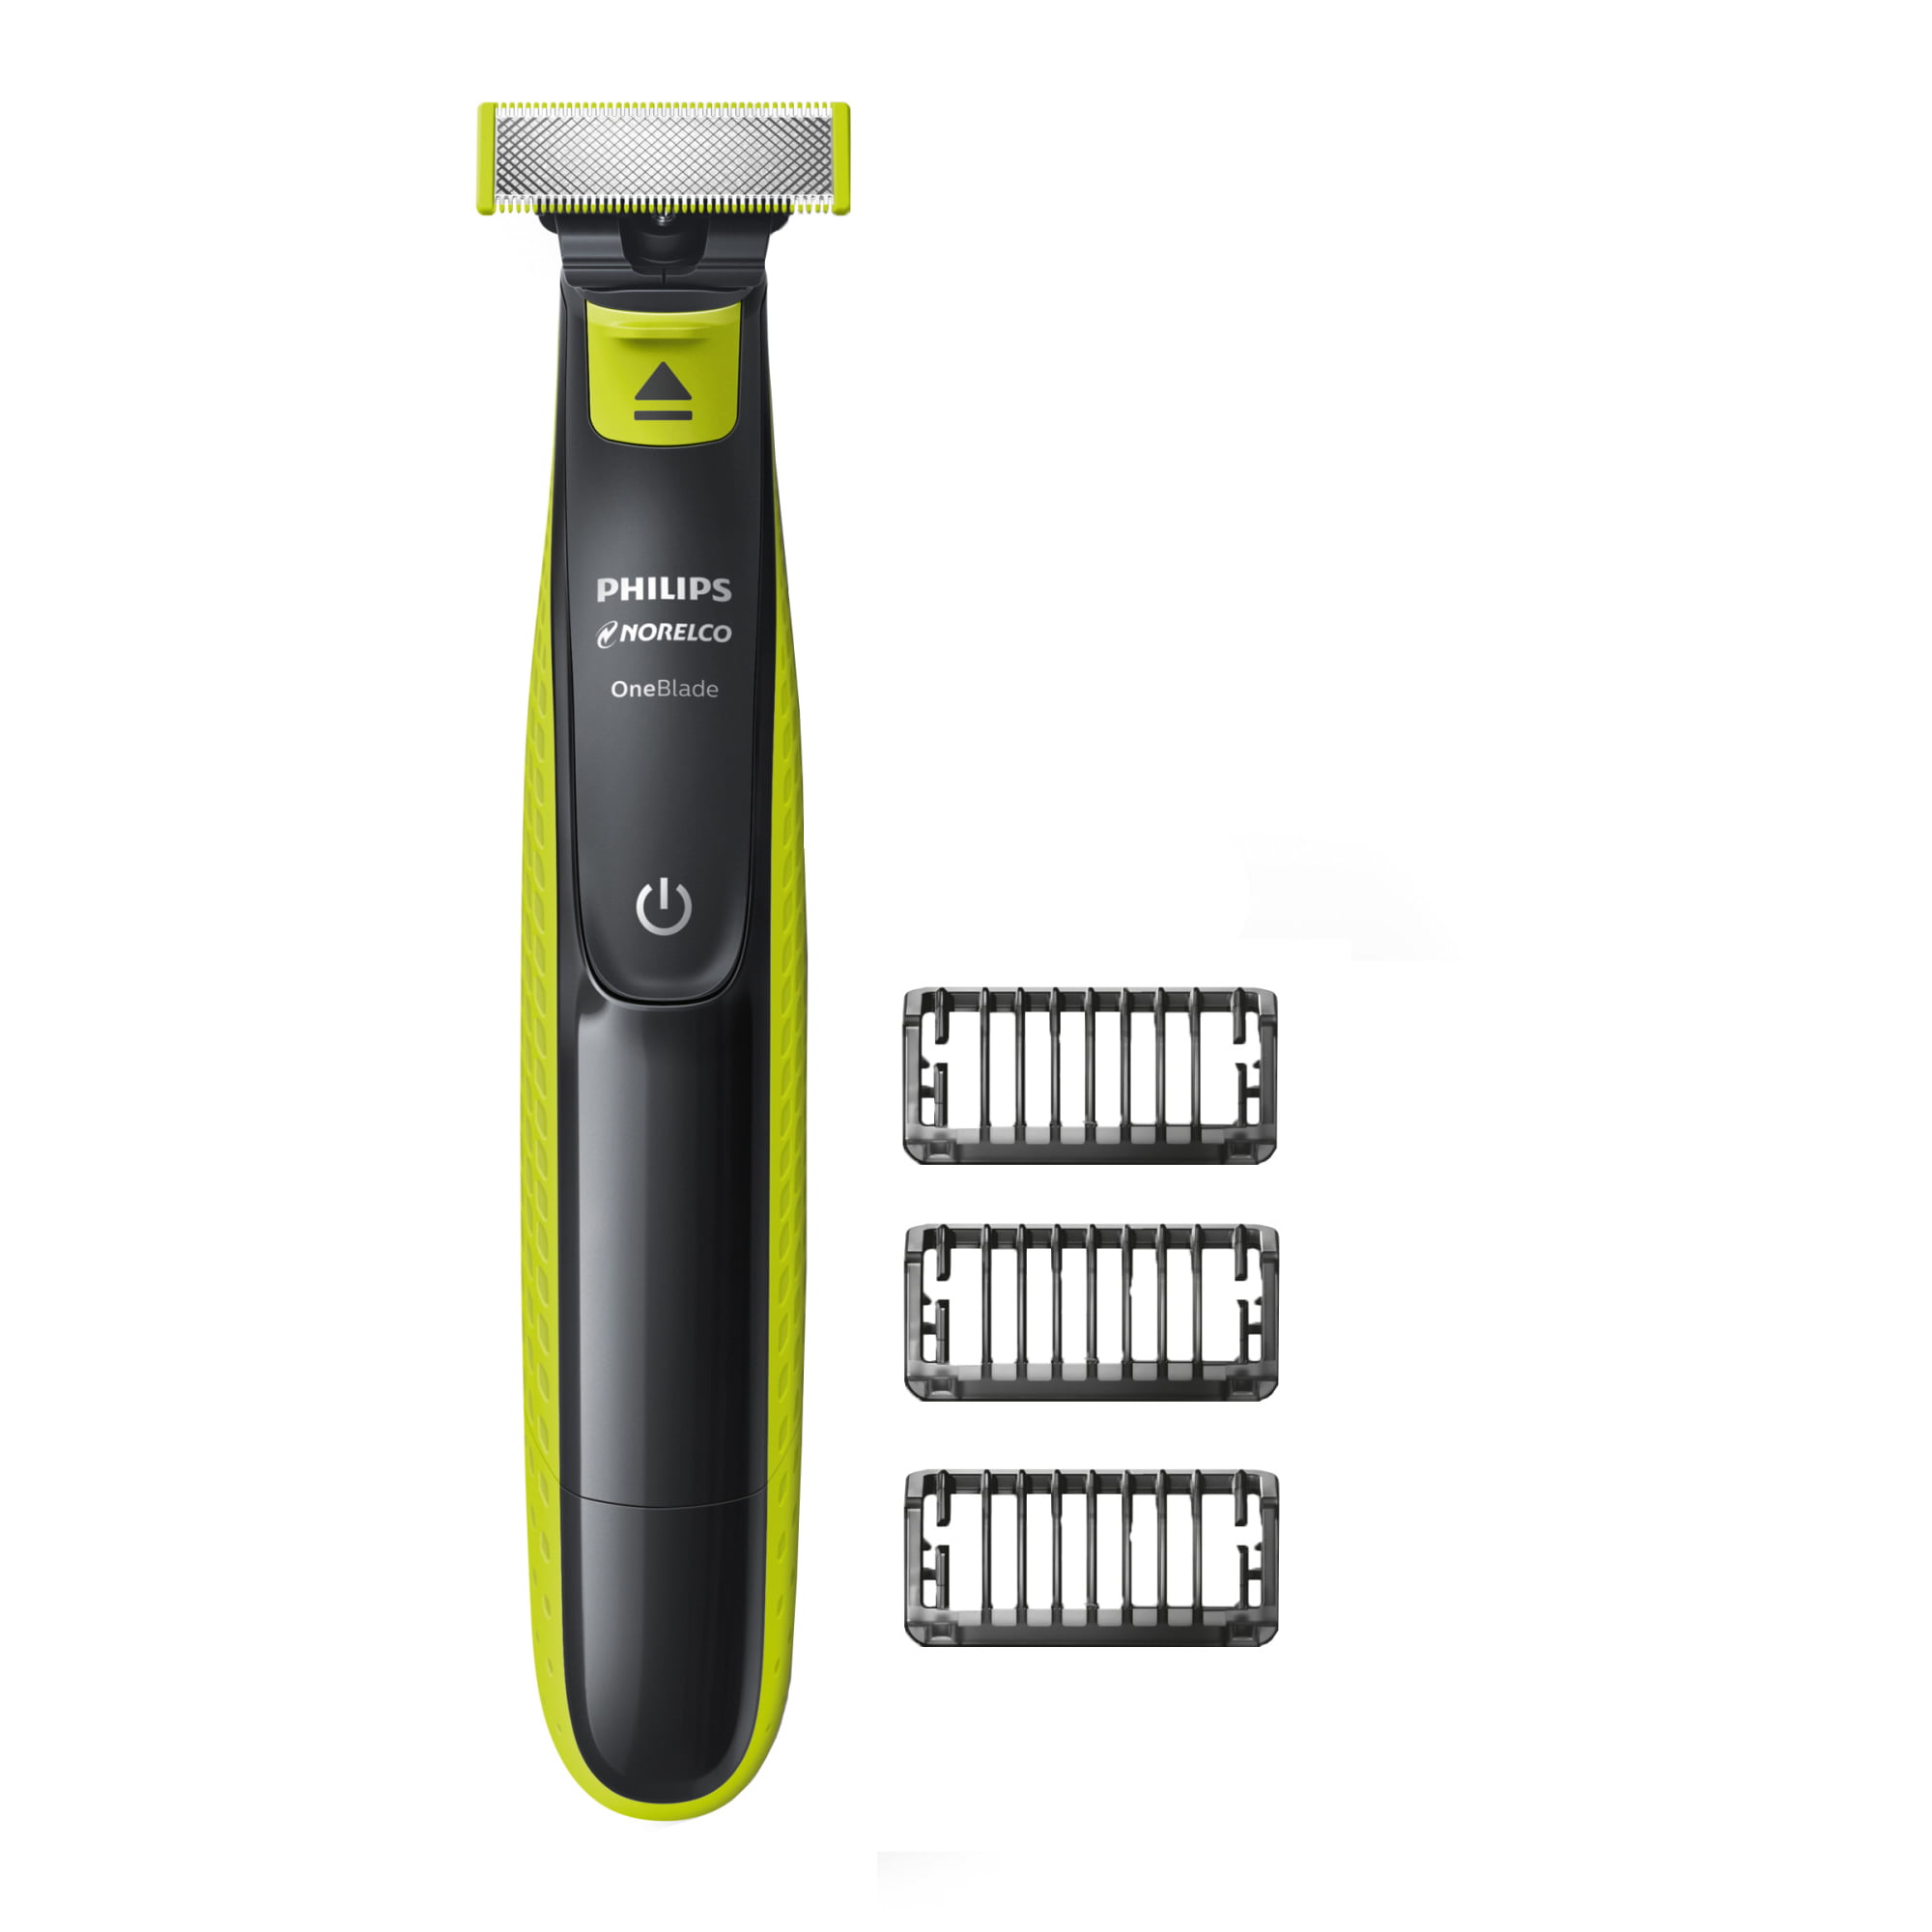 Moon Ale Air mail Philips Norelco Oneblade Hybrid Electric Trimmer and Shaver, QP2520/70 -  Walmart.com